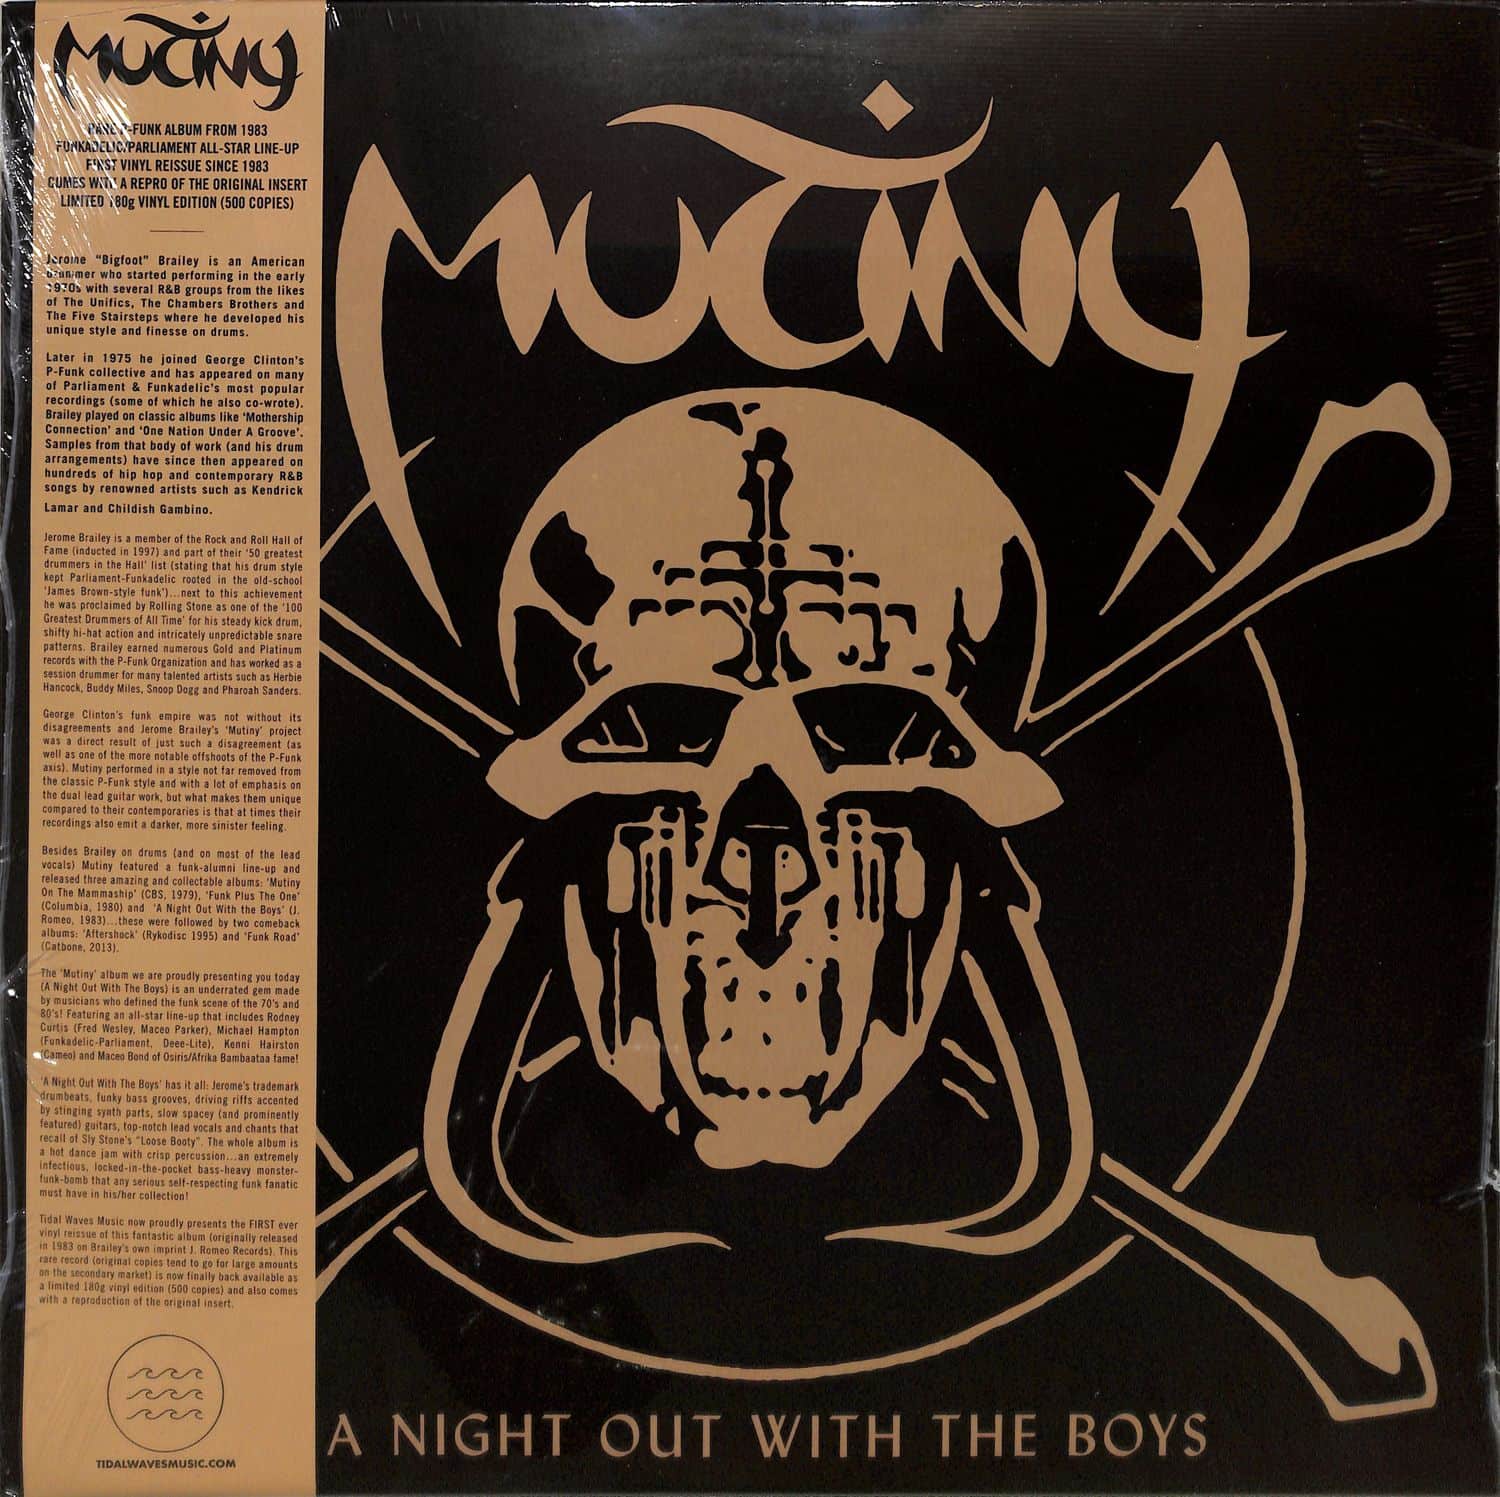 Mutiny - A NIGHT OUT WITH THE BOYS 